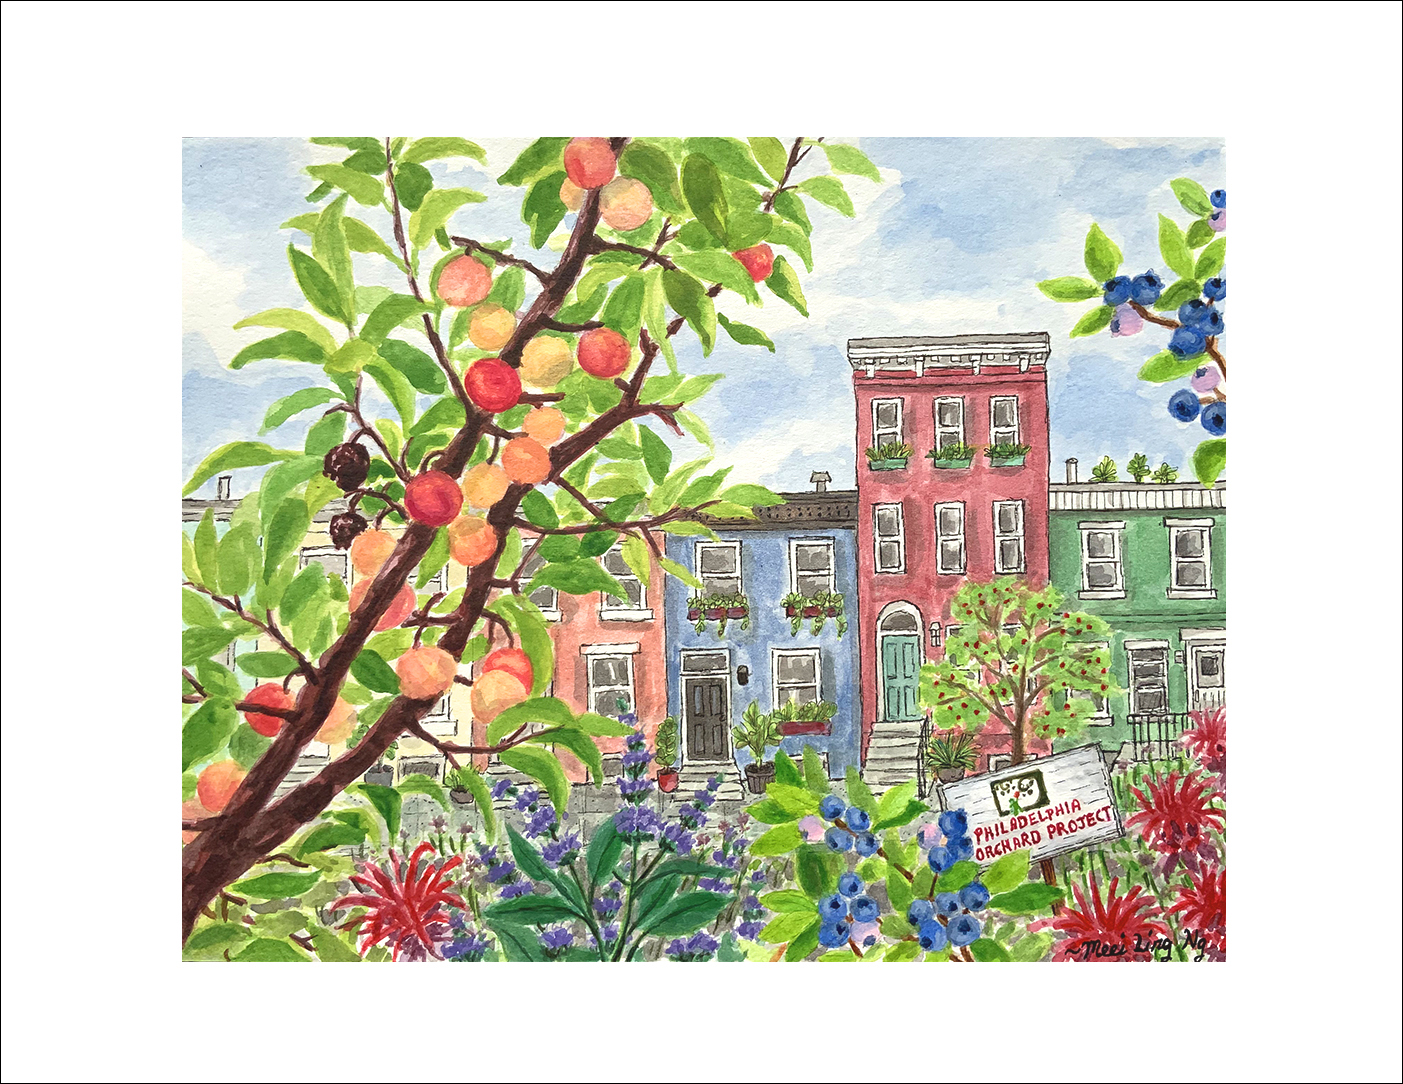 An acrylic/watercolor painting depicting an urban orchard with rowhouses in the background